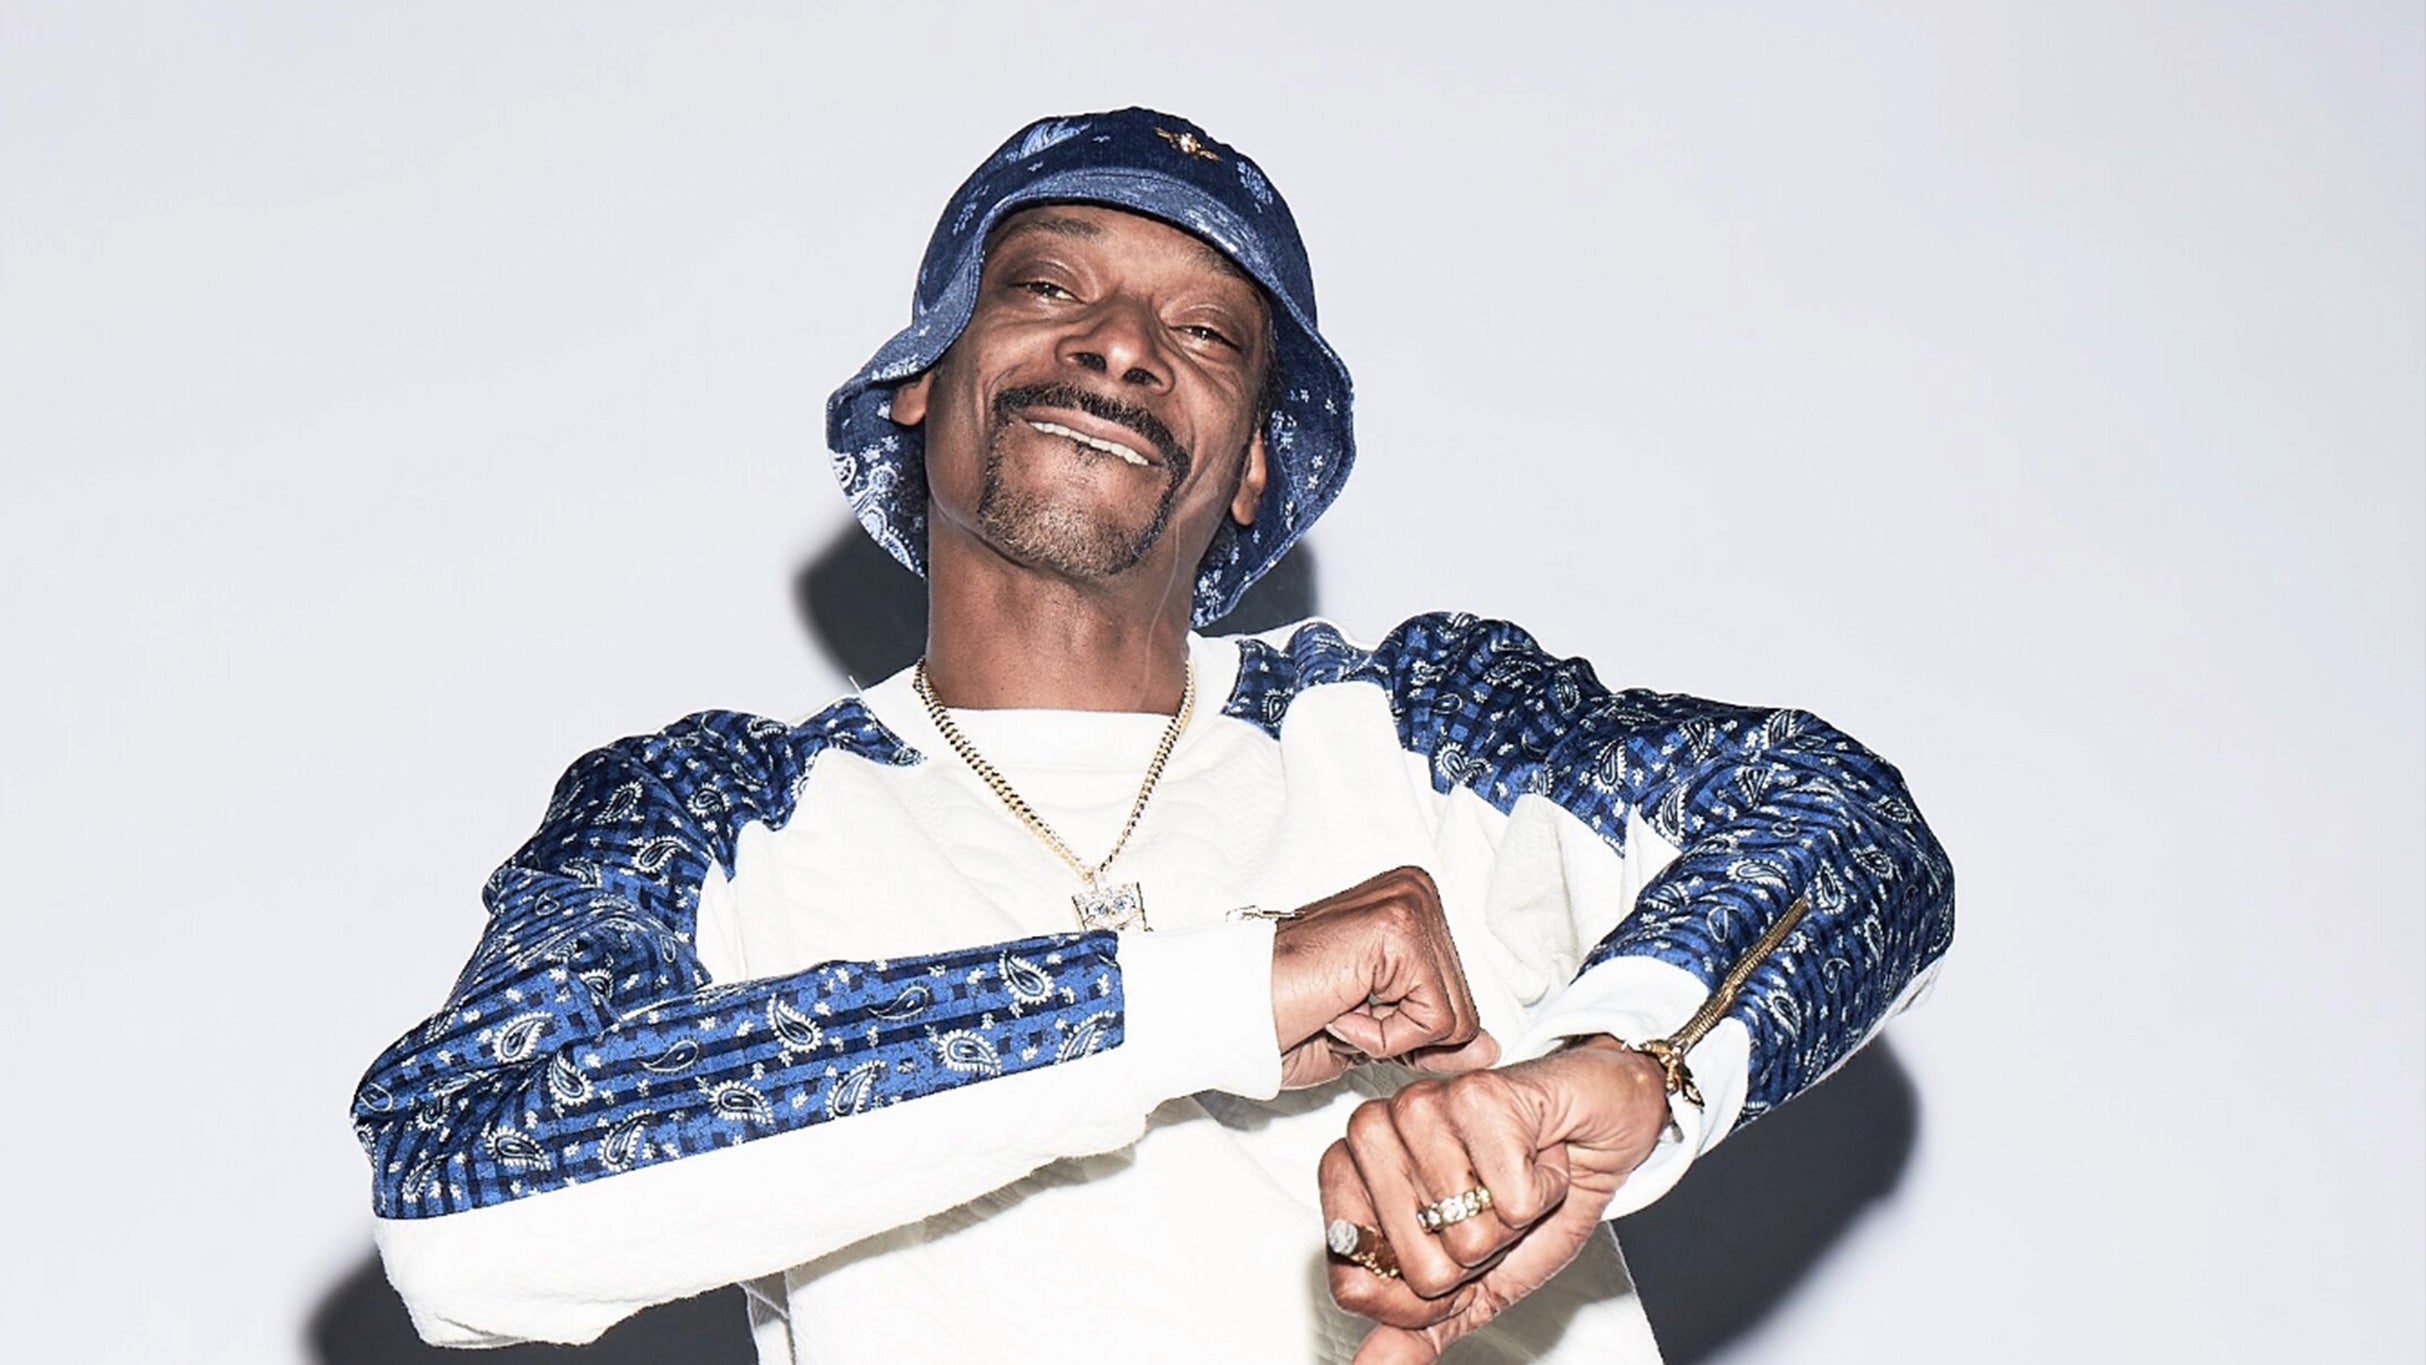 Snoop Dogg - Cali To Canada Tour  in Toronto promo photo for VIP Package presale offer code